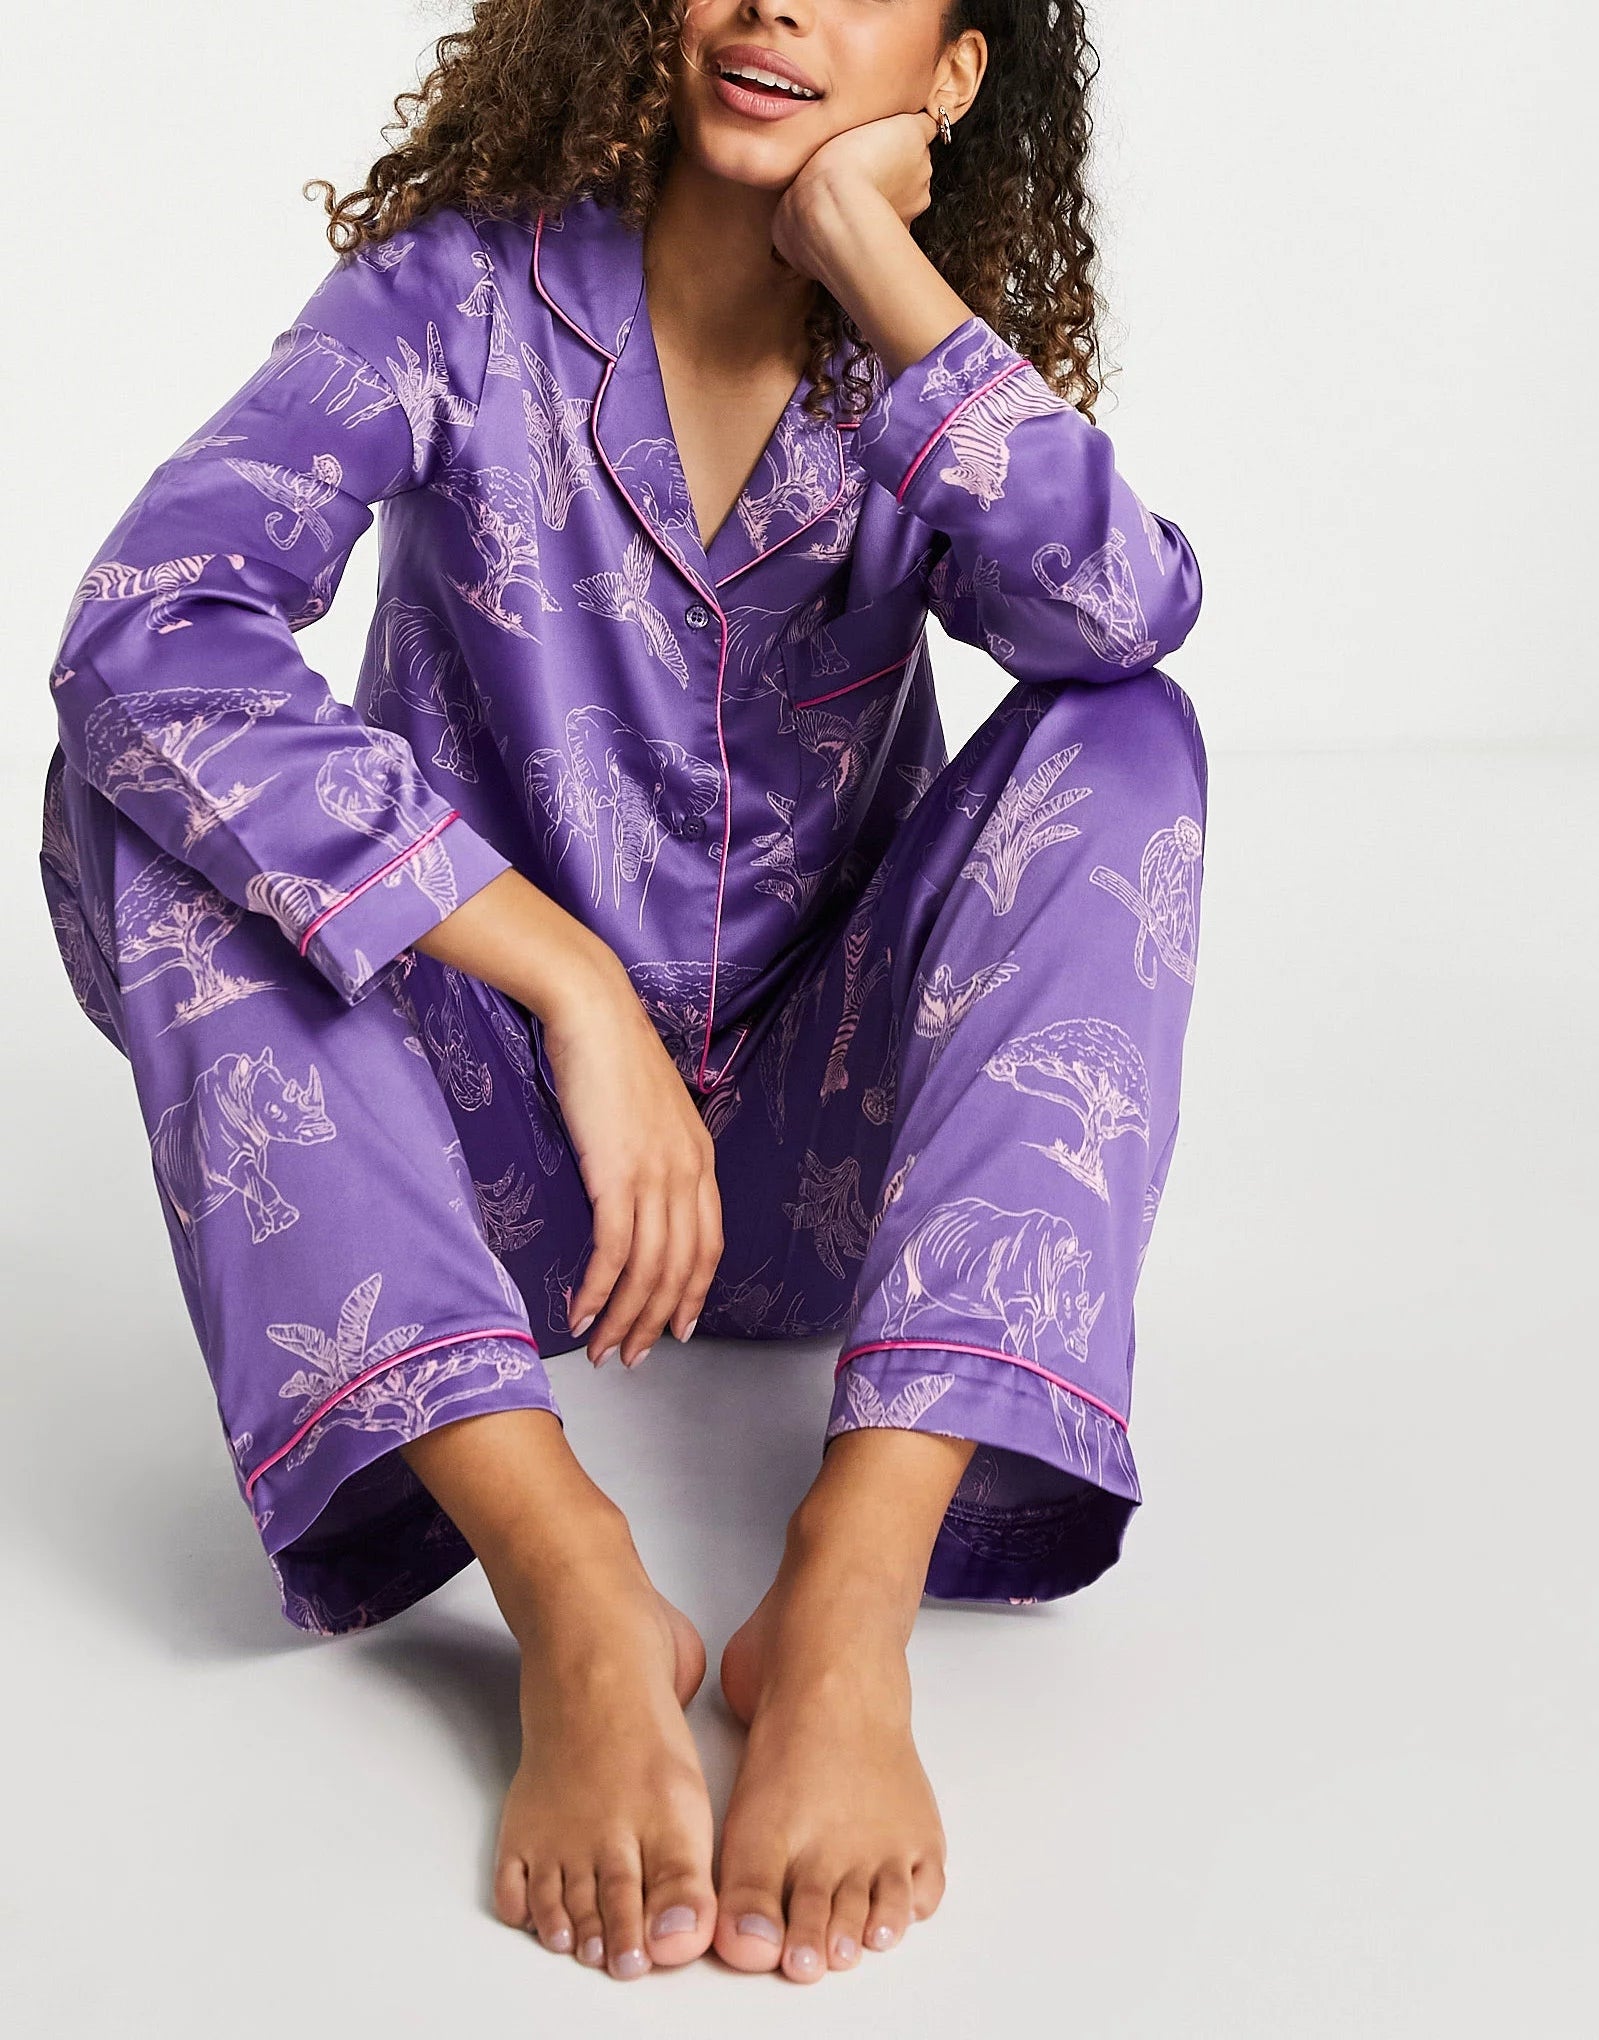 Purple Color Digital Abstract Printed loungewear/Nightsuit For Women With Pants.